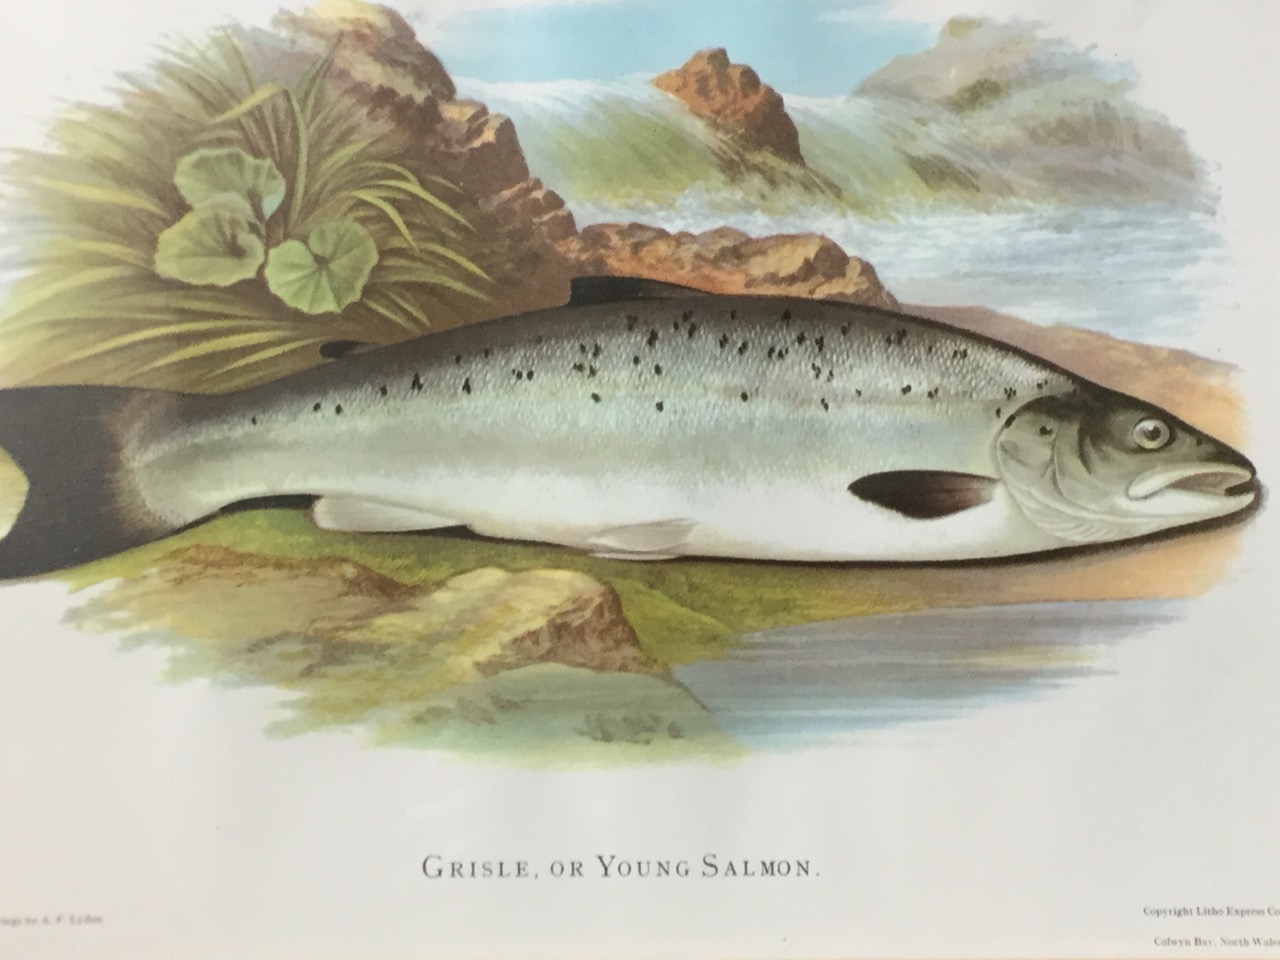 A set of four framed fish prints, Common Trout, Grisle, Galway Seatrout, and Salmon, the coloured - Image 4 of 6